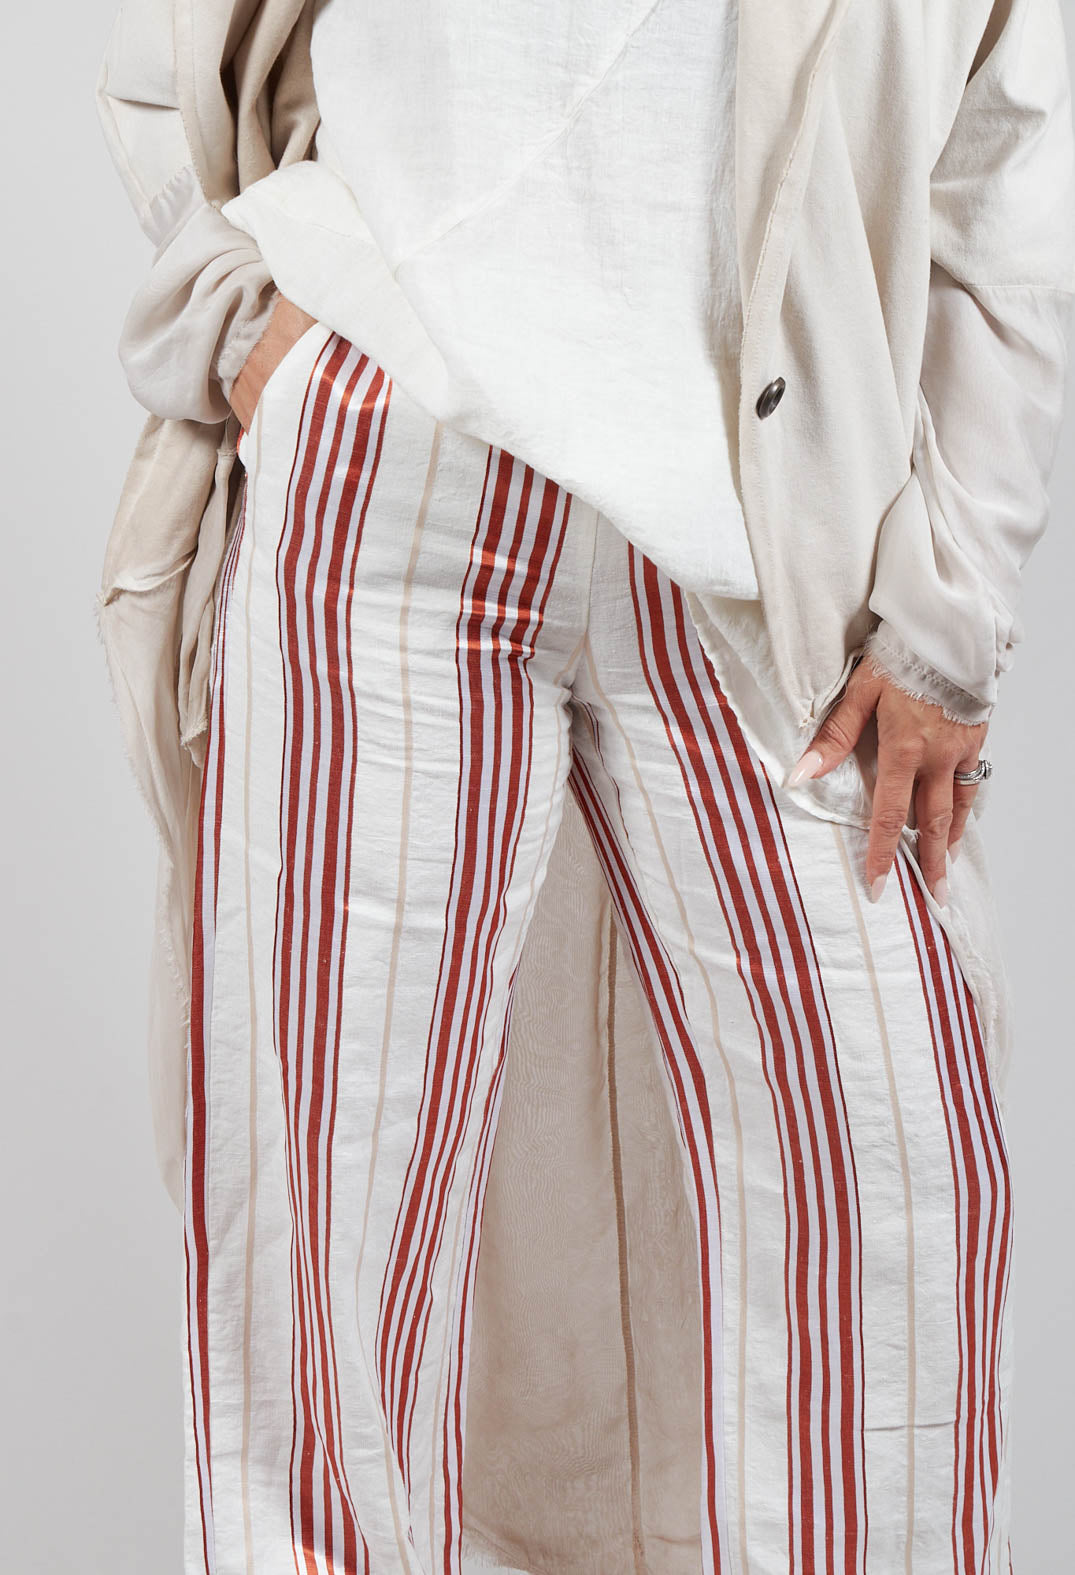 Summer Trousers in Naturale / Brick